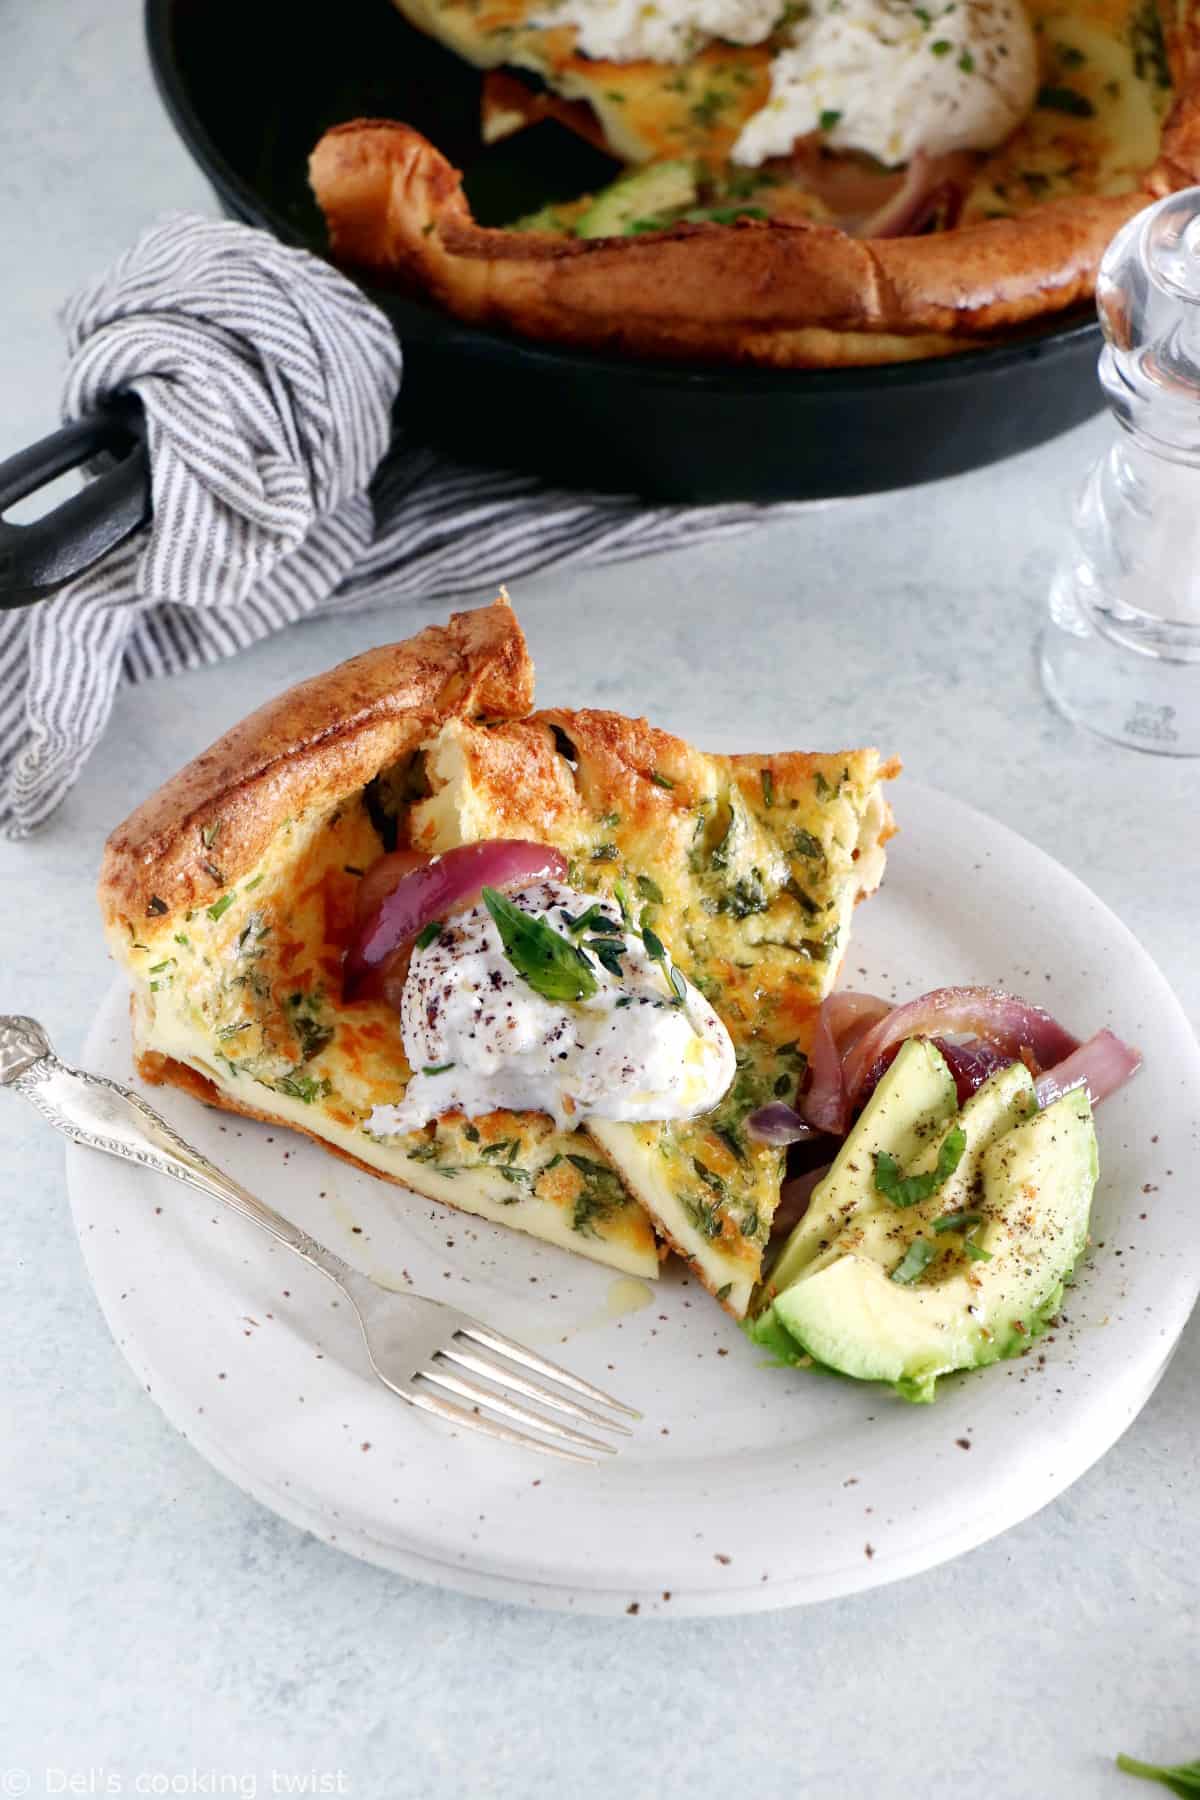 Savory Dutch Baby Pancake (Easy and delicious!) - Del's cooking twist